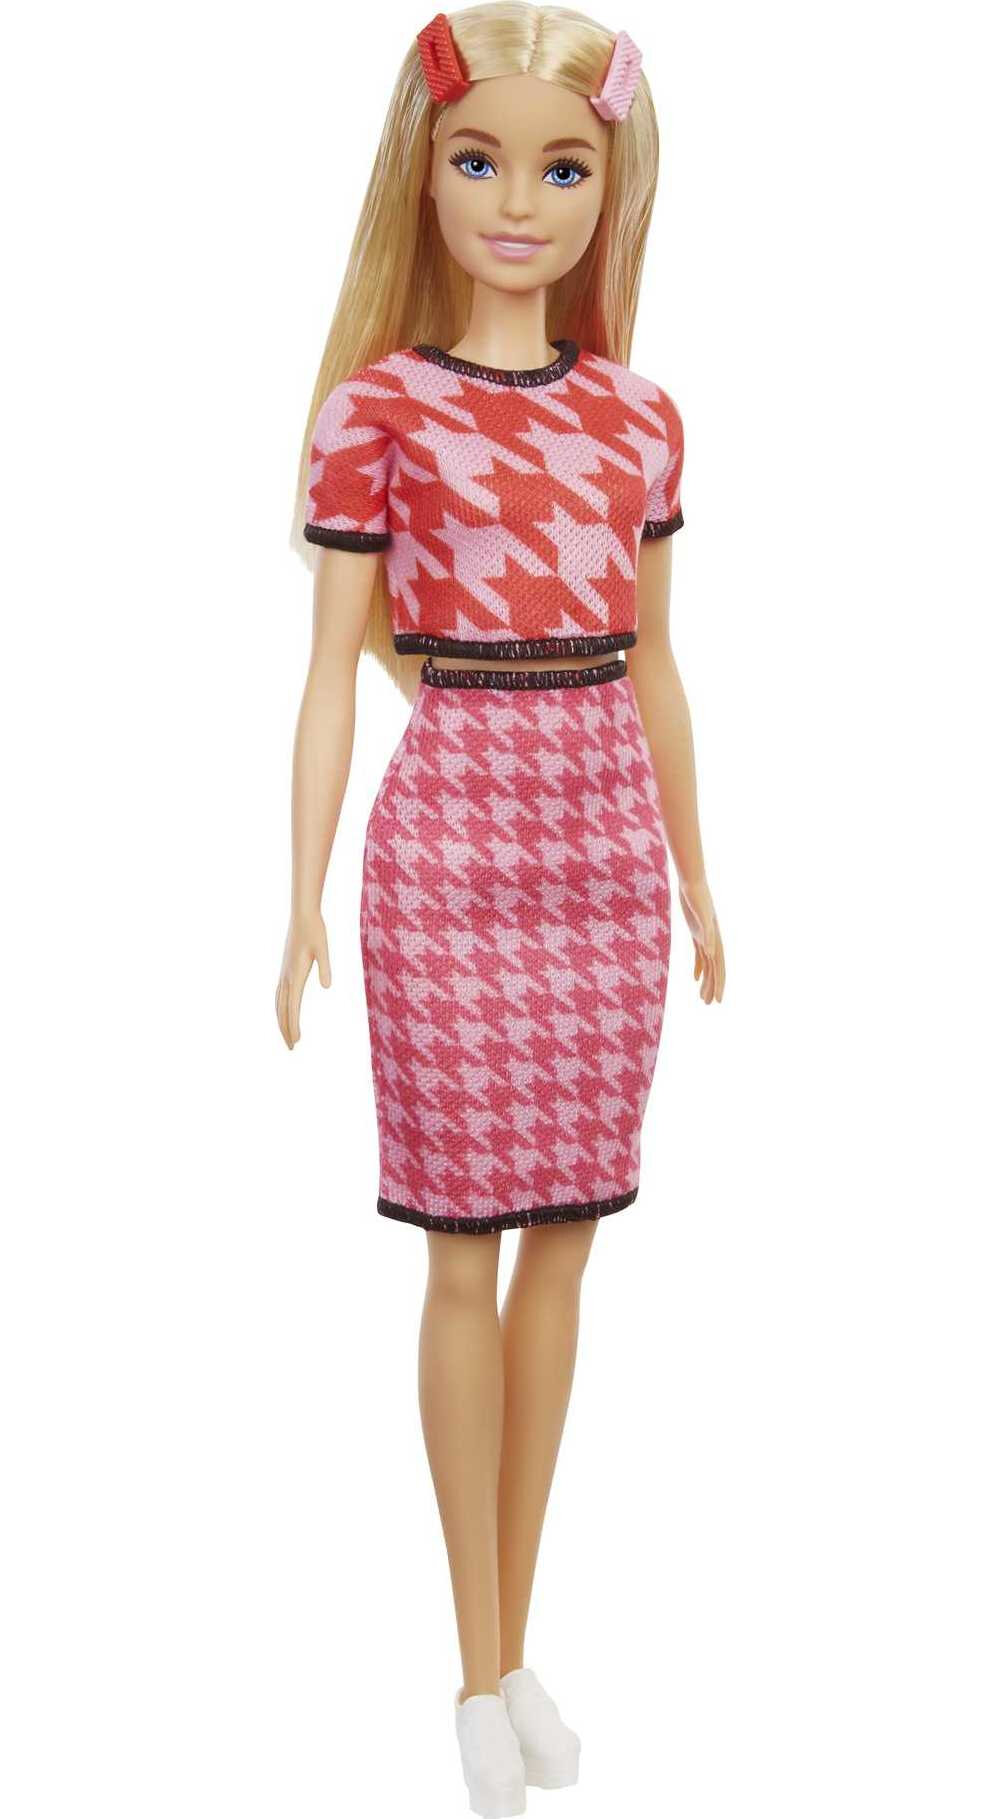 Barbie Fashionistas Doll #169 with Long Blonde Hair in Houndstooth Crop Top & Skirt - image 1 of 7